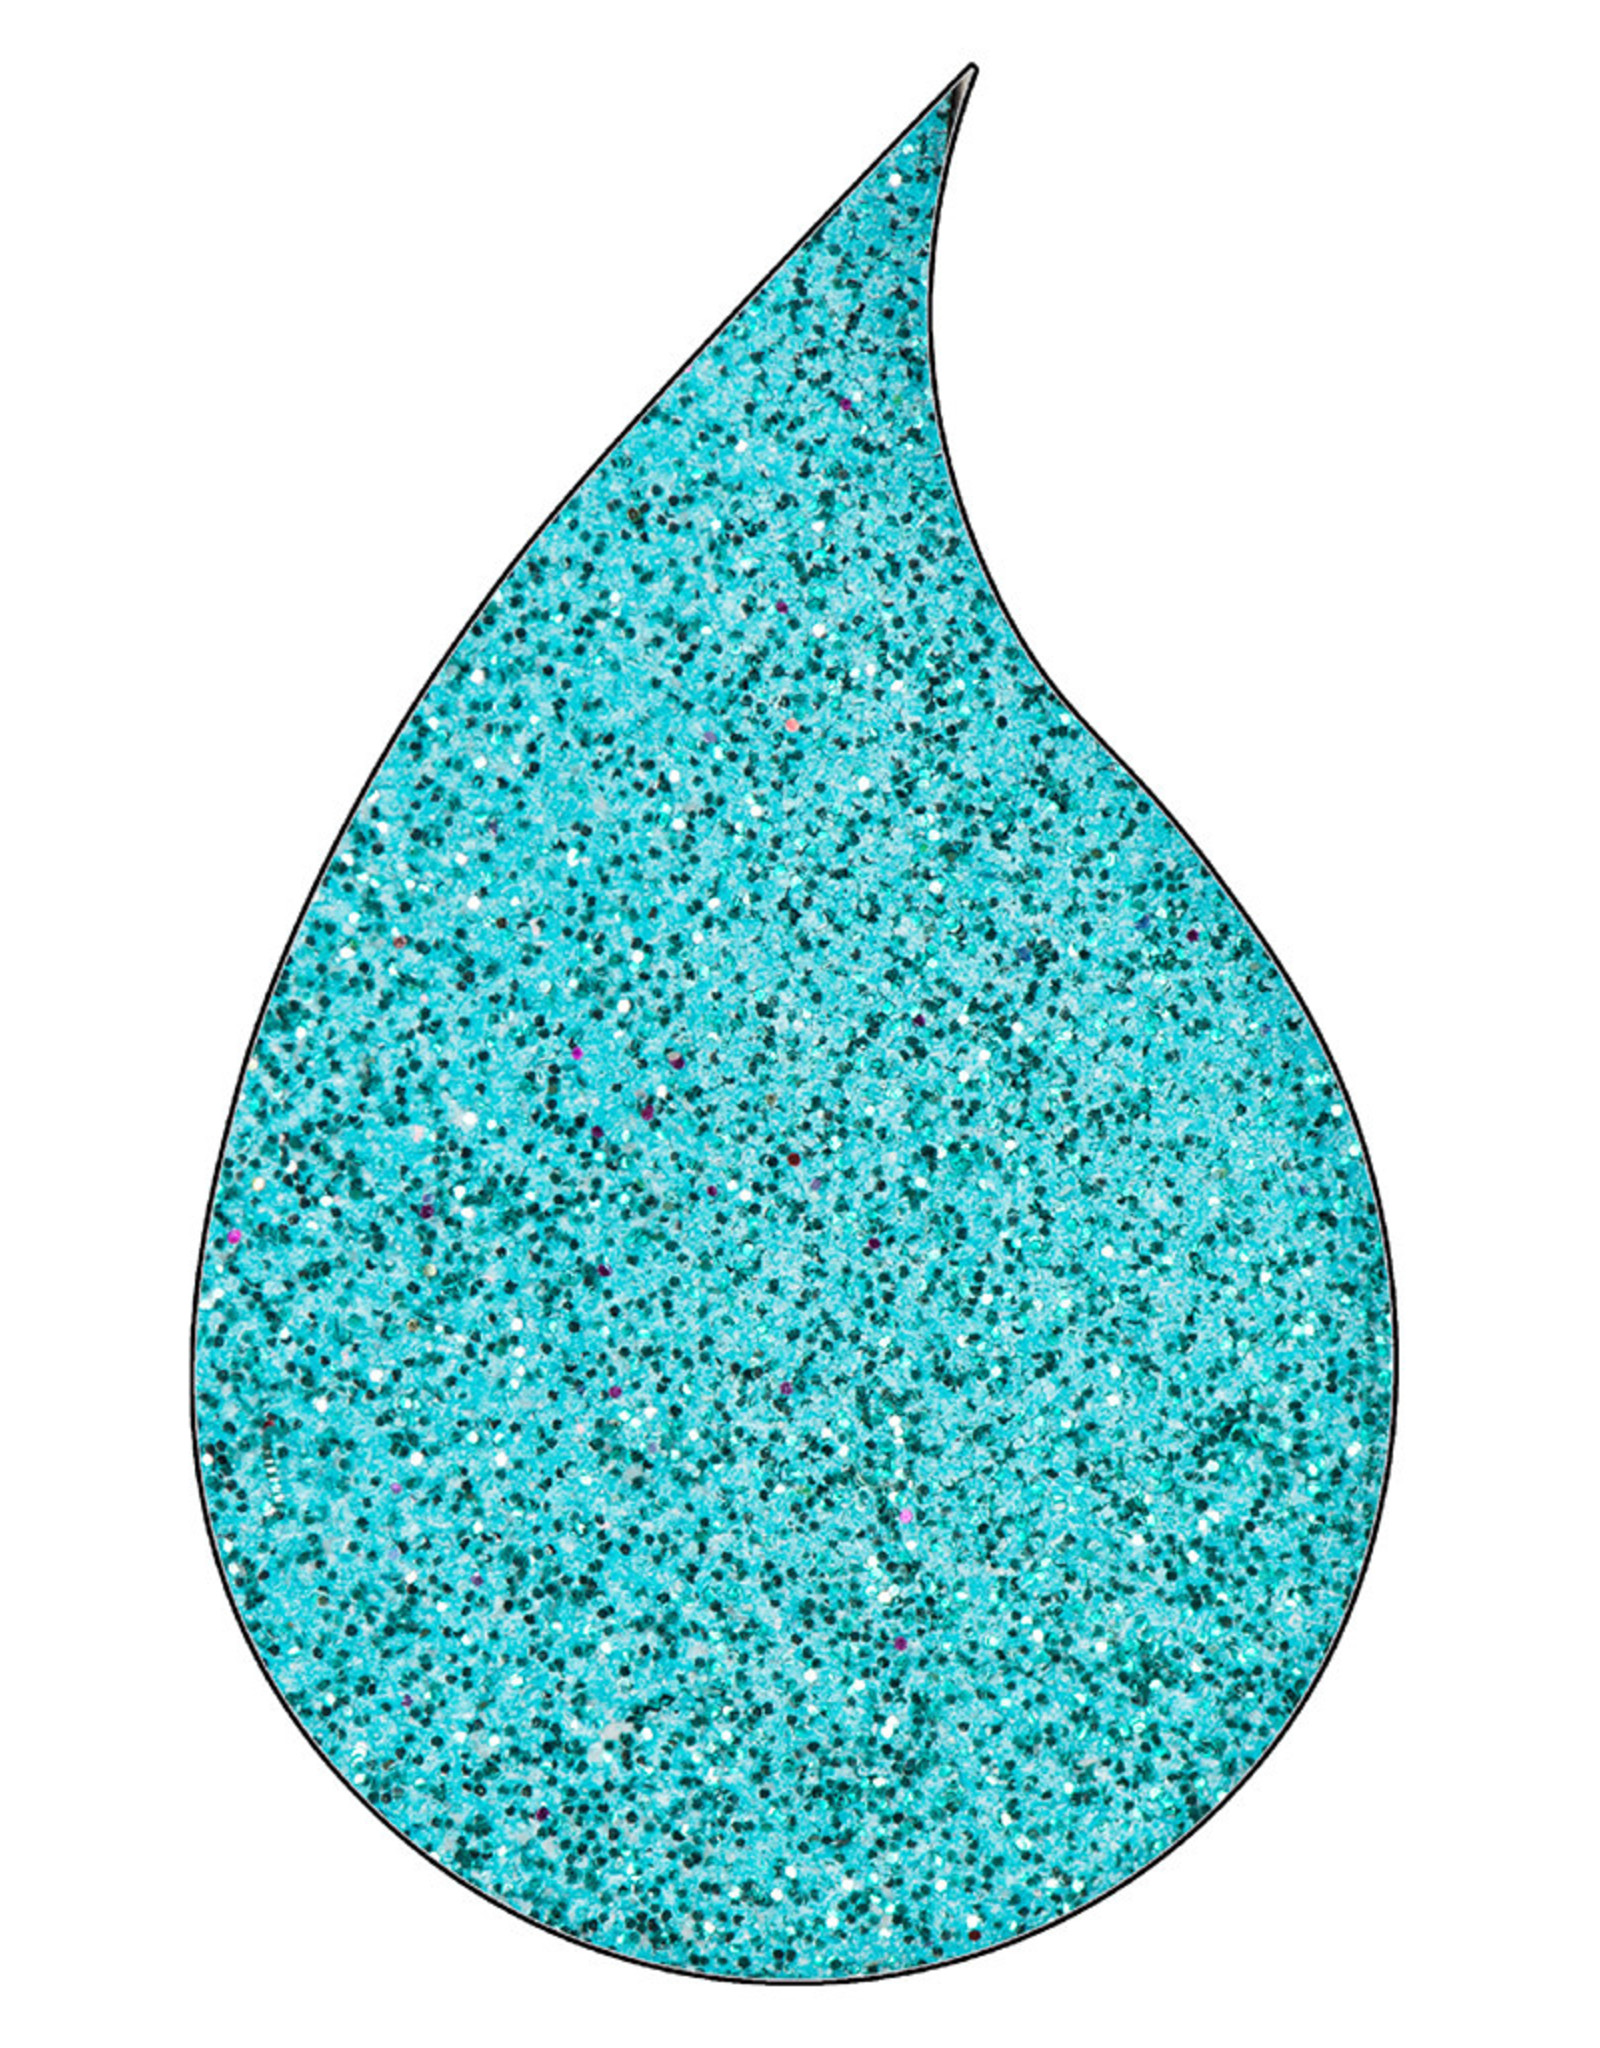 WOW! WOW TOTALLY TEAL EMBOSSING GLITTER 0.5OZ